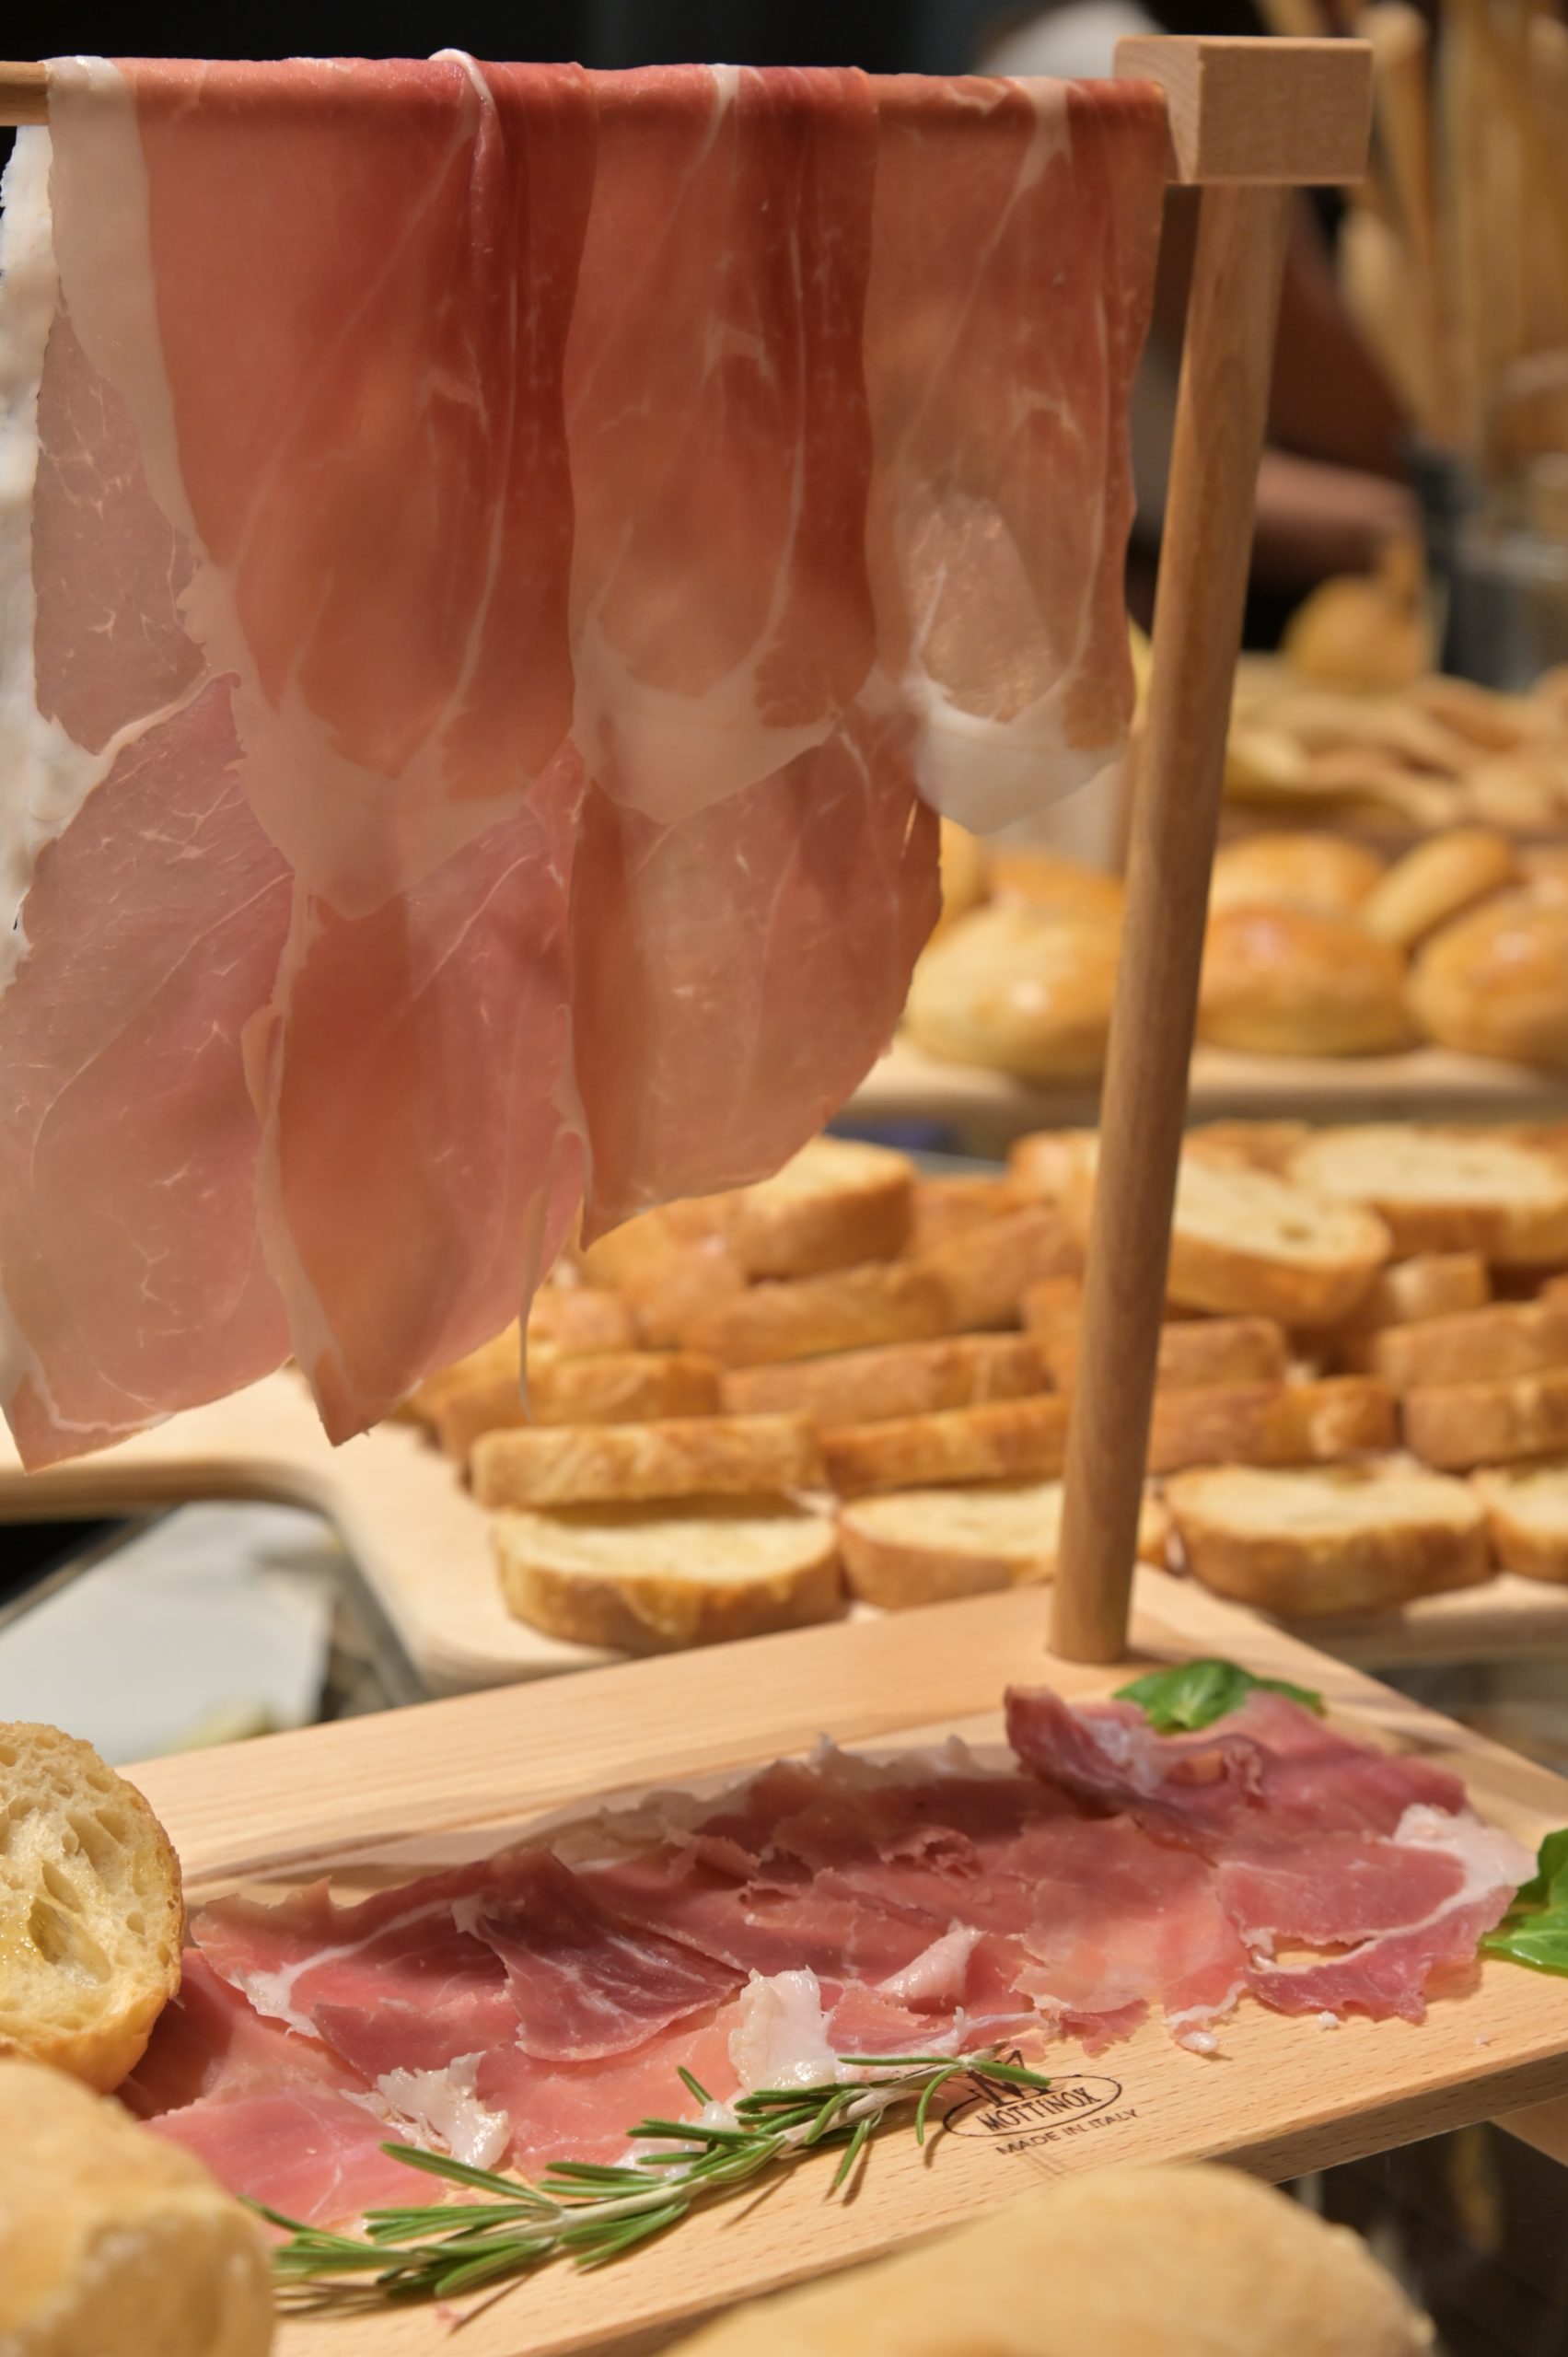 FROM ITALY TO SPAIN (HAM TASTING)